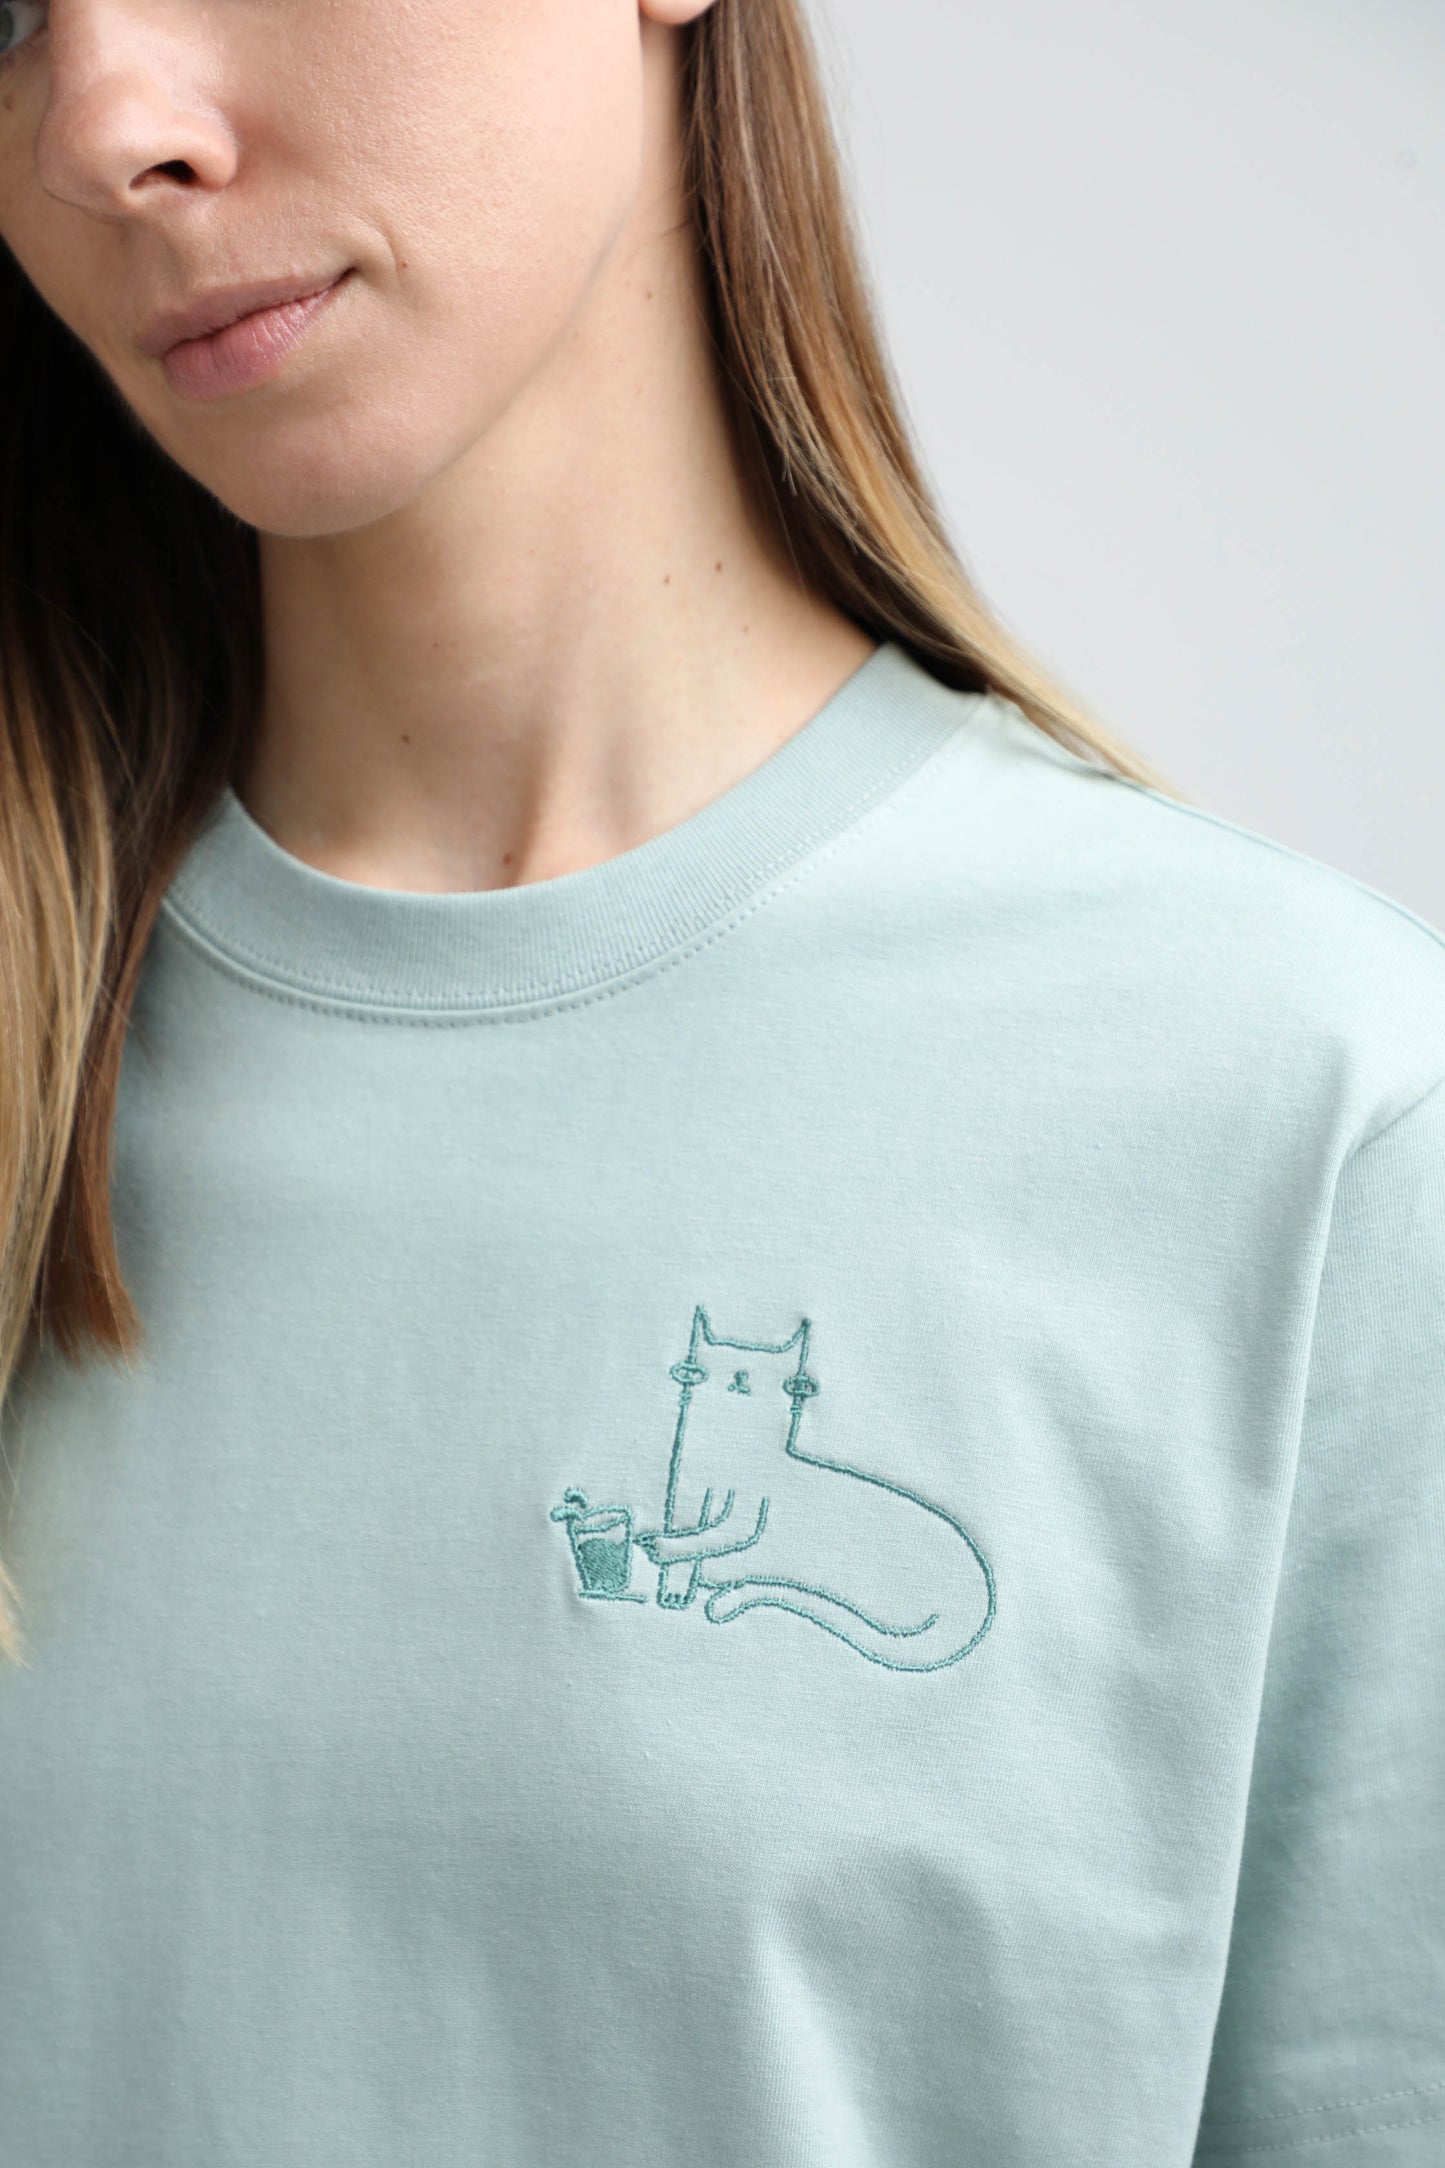 -25% | XL available only | Cat | Heavyweight T-Shirt with embroidered cat. Oversized | Unisex - premium dog goods handmade in Europe by My Wild Other